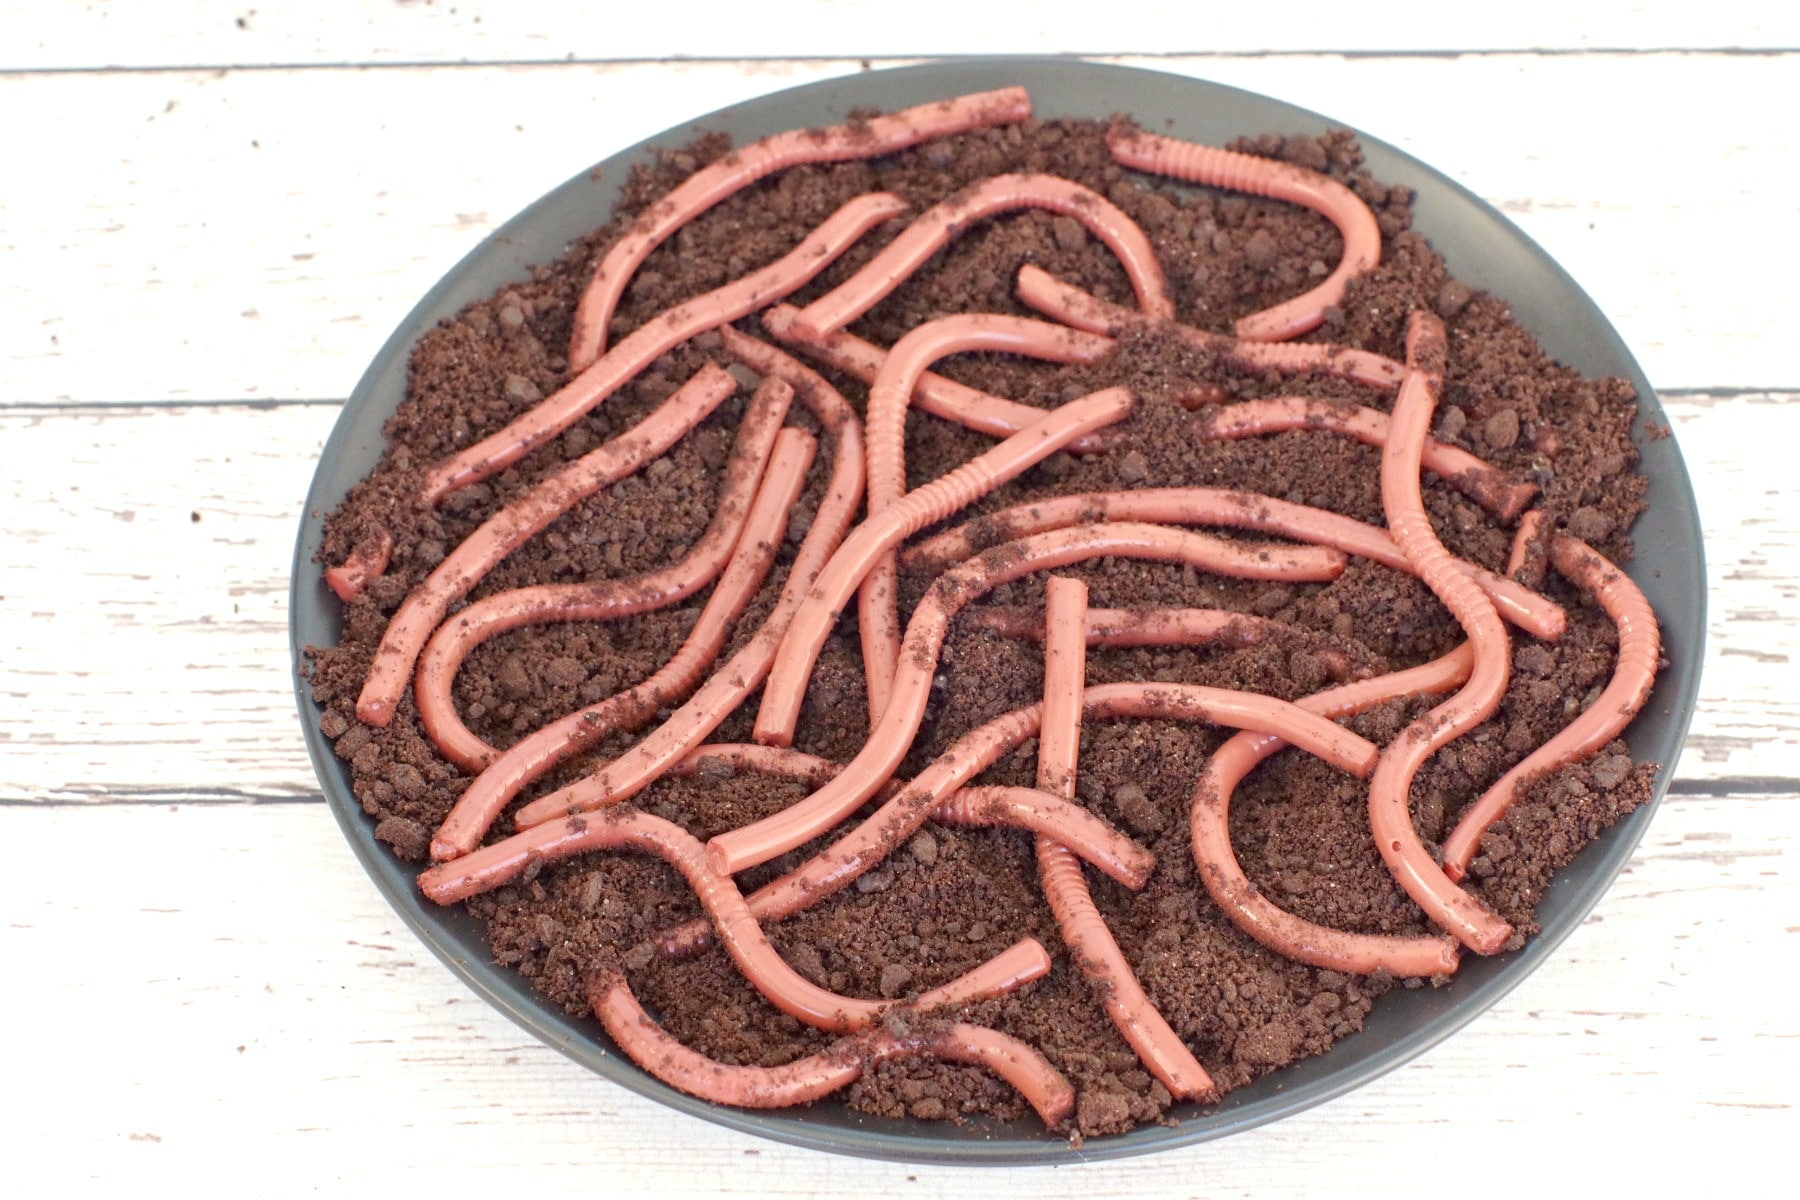 jello worm in dirt (Oreo cookie crumbs) on plate